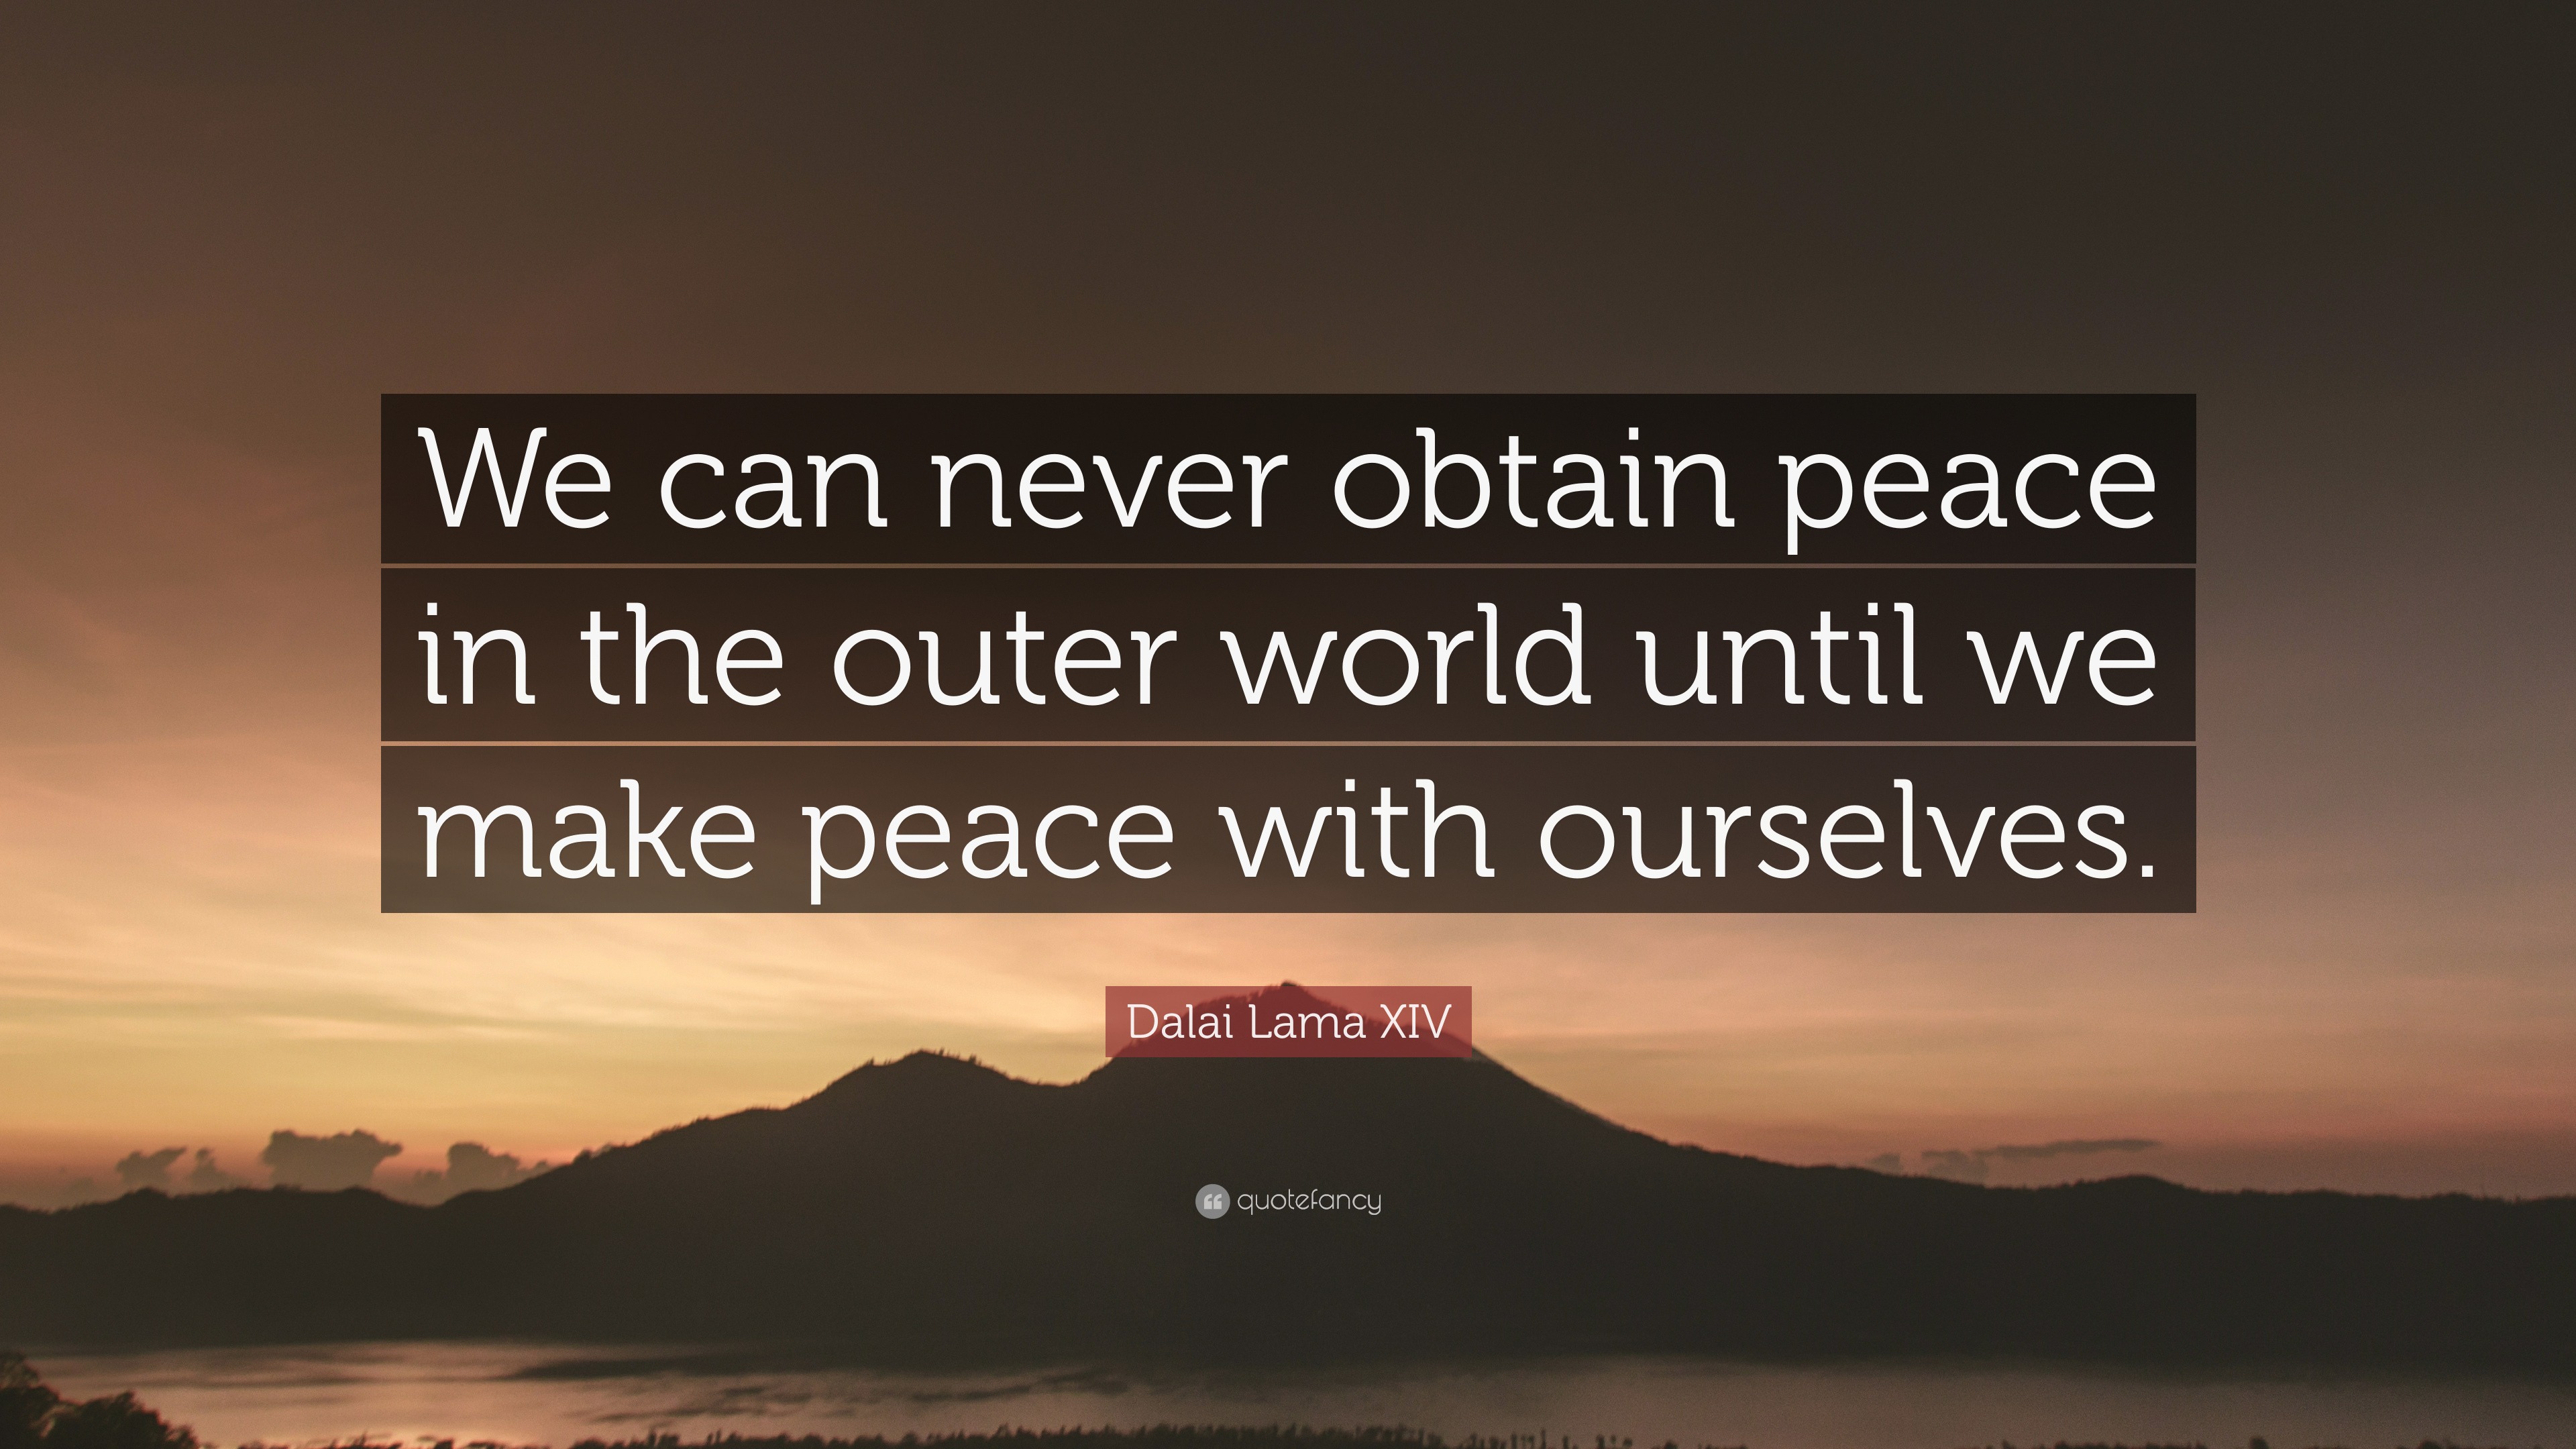 Dalai Lama XIV Quote: “We can never obtain peace in the outer world ...